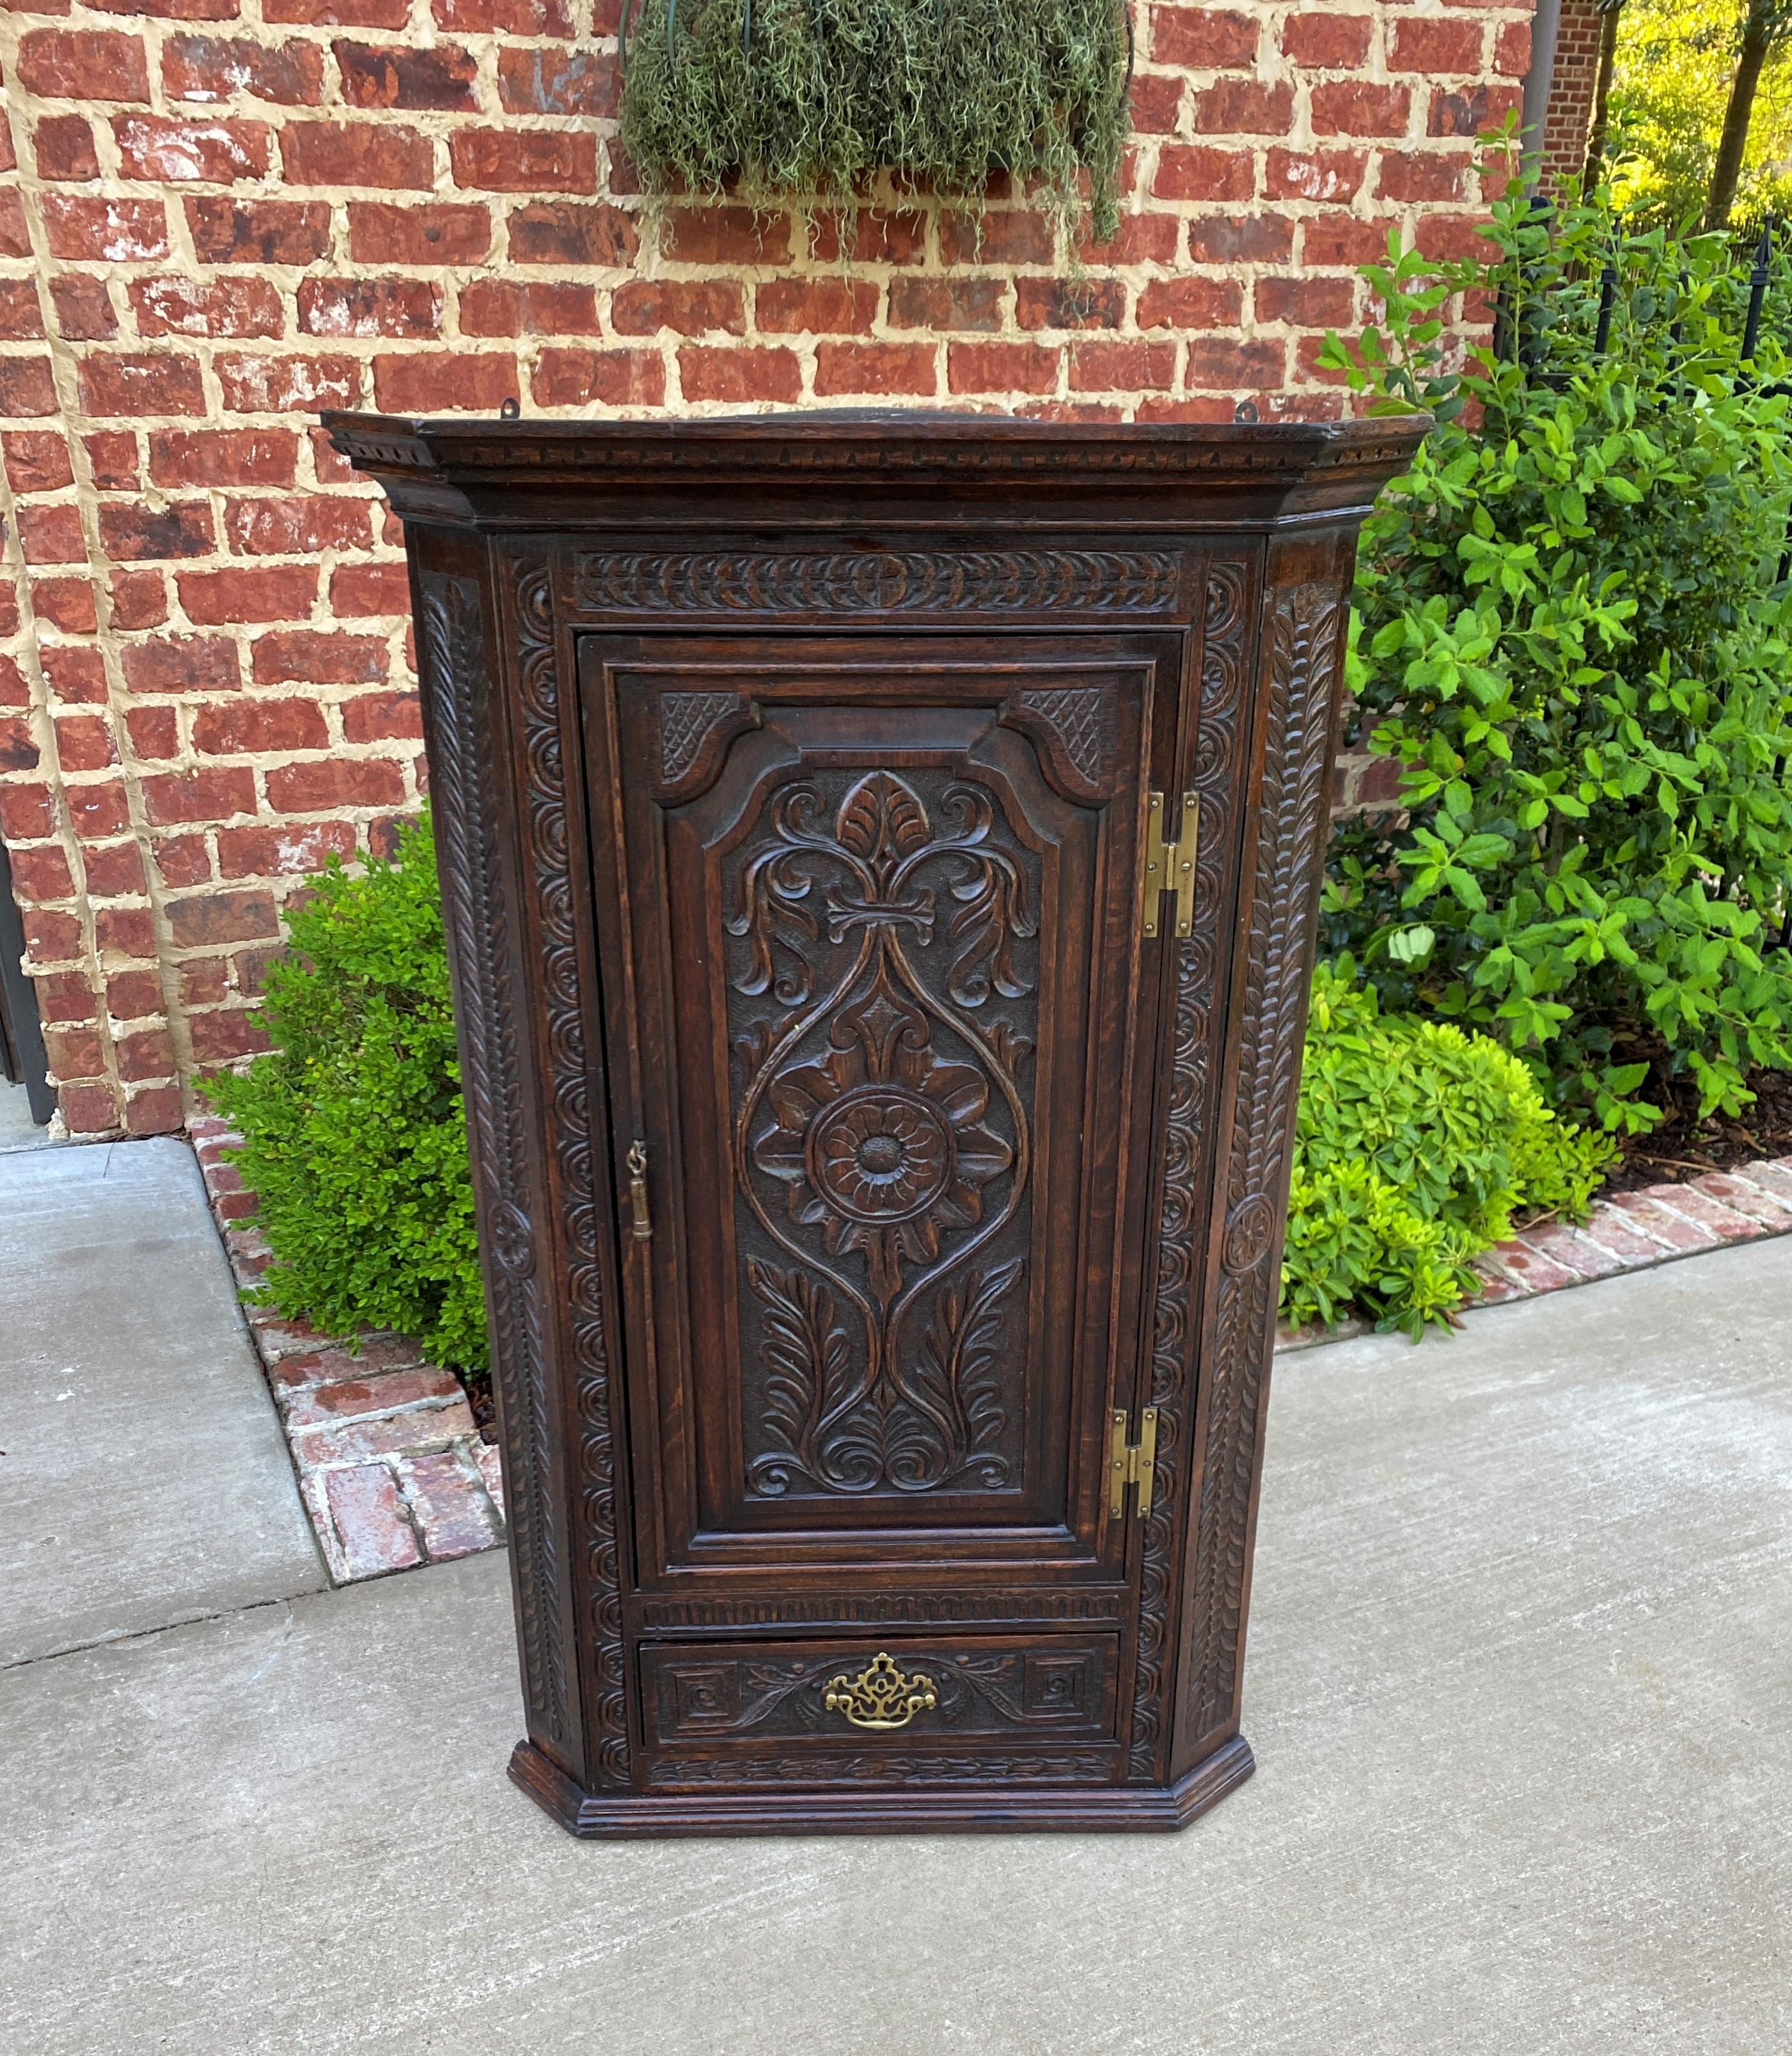 Beautifully carved antique English dark oak hanging wall or freestanding corner cabinet, medicine or spice cabinet with interior shelves~~c. Mid to Late 19th Century

Full of classic English charm~~beautifully carved dark oak wall or freestanding